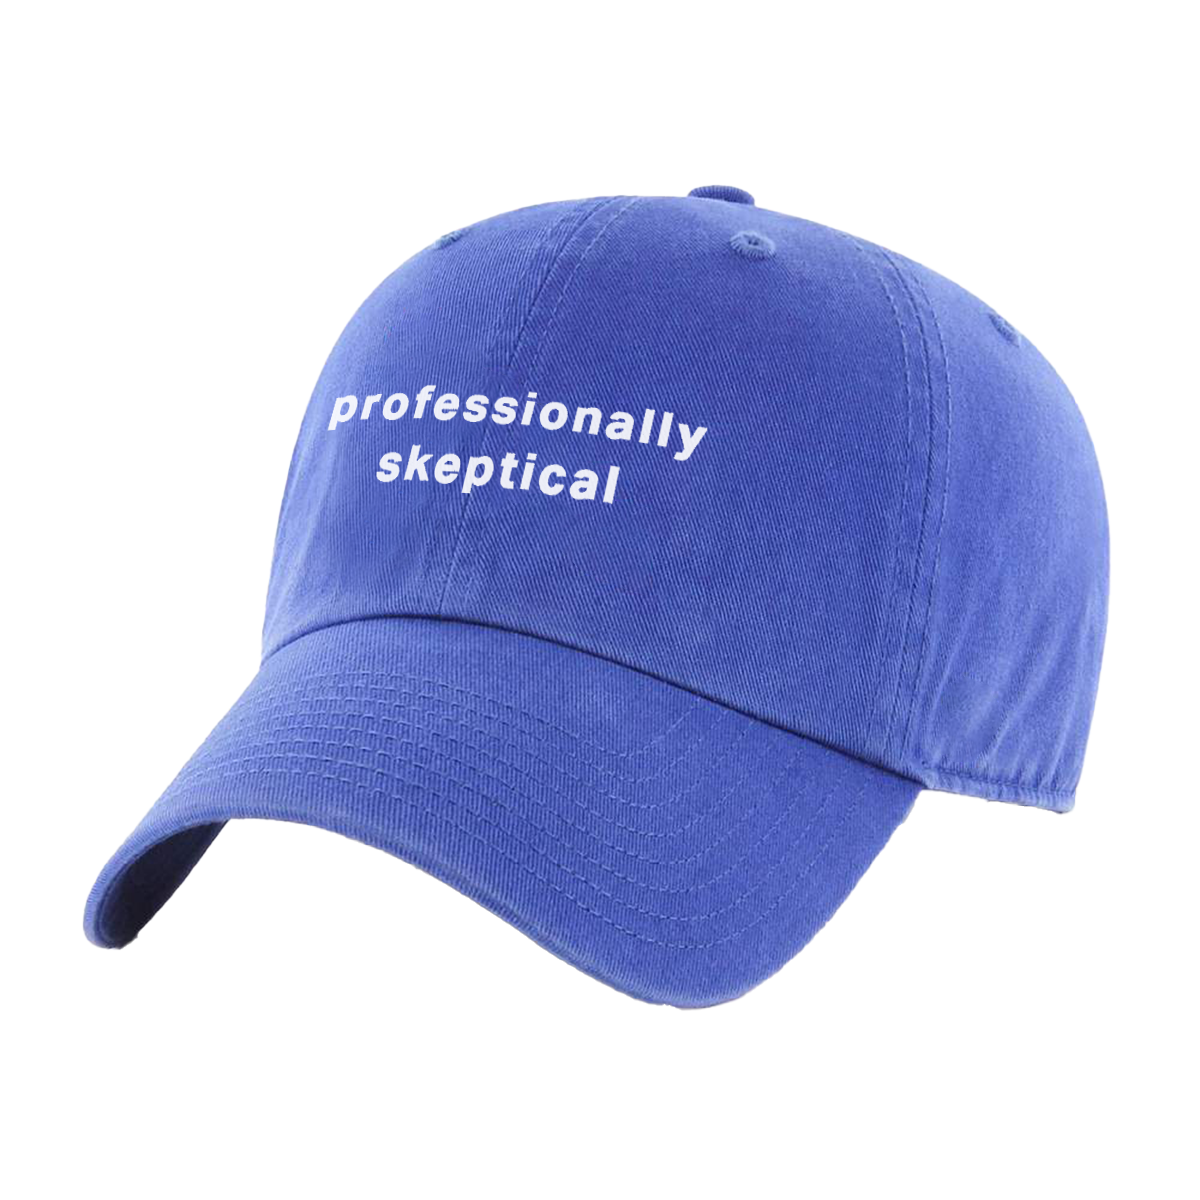 Professionally Skeptical Hat